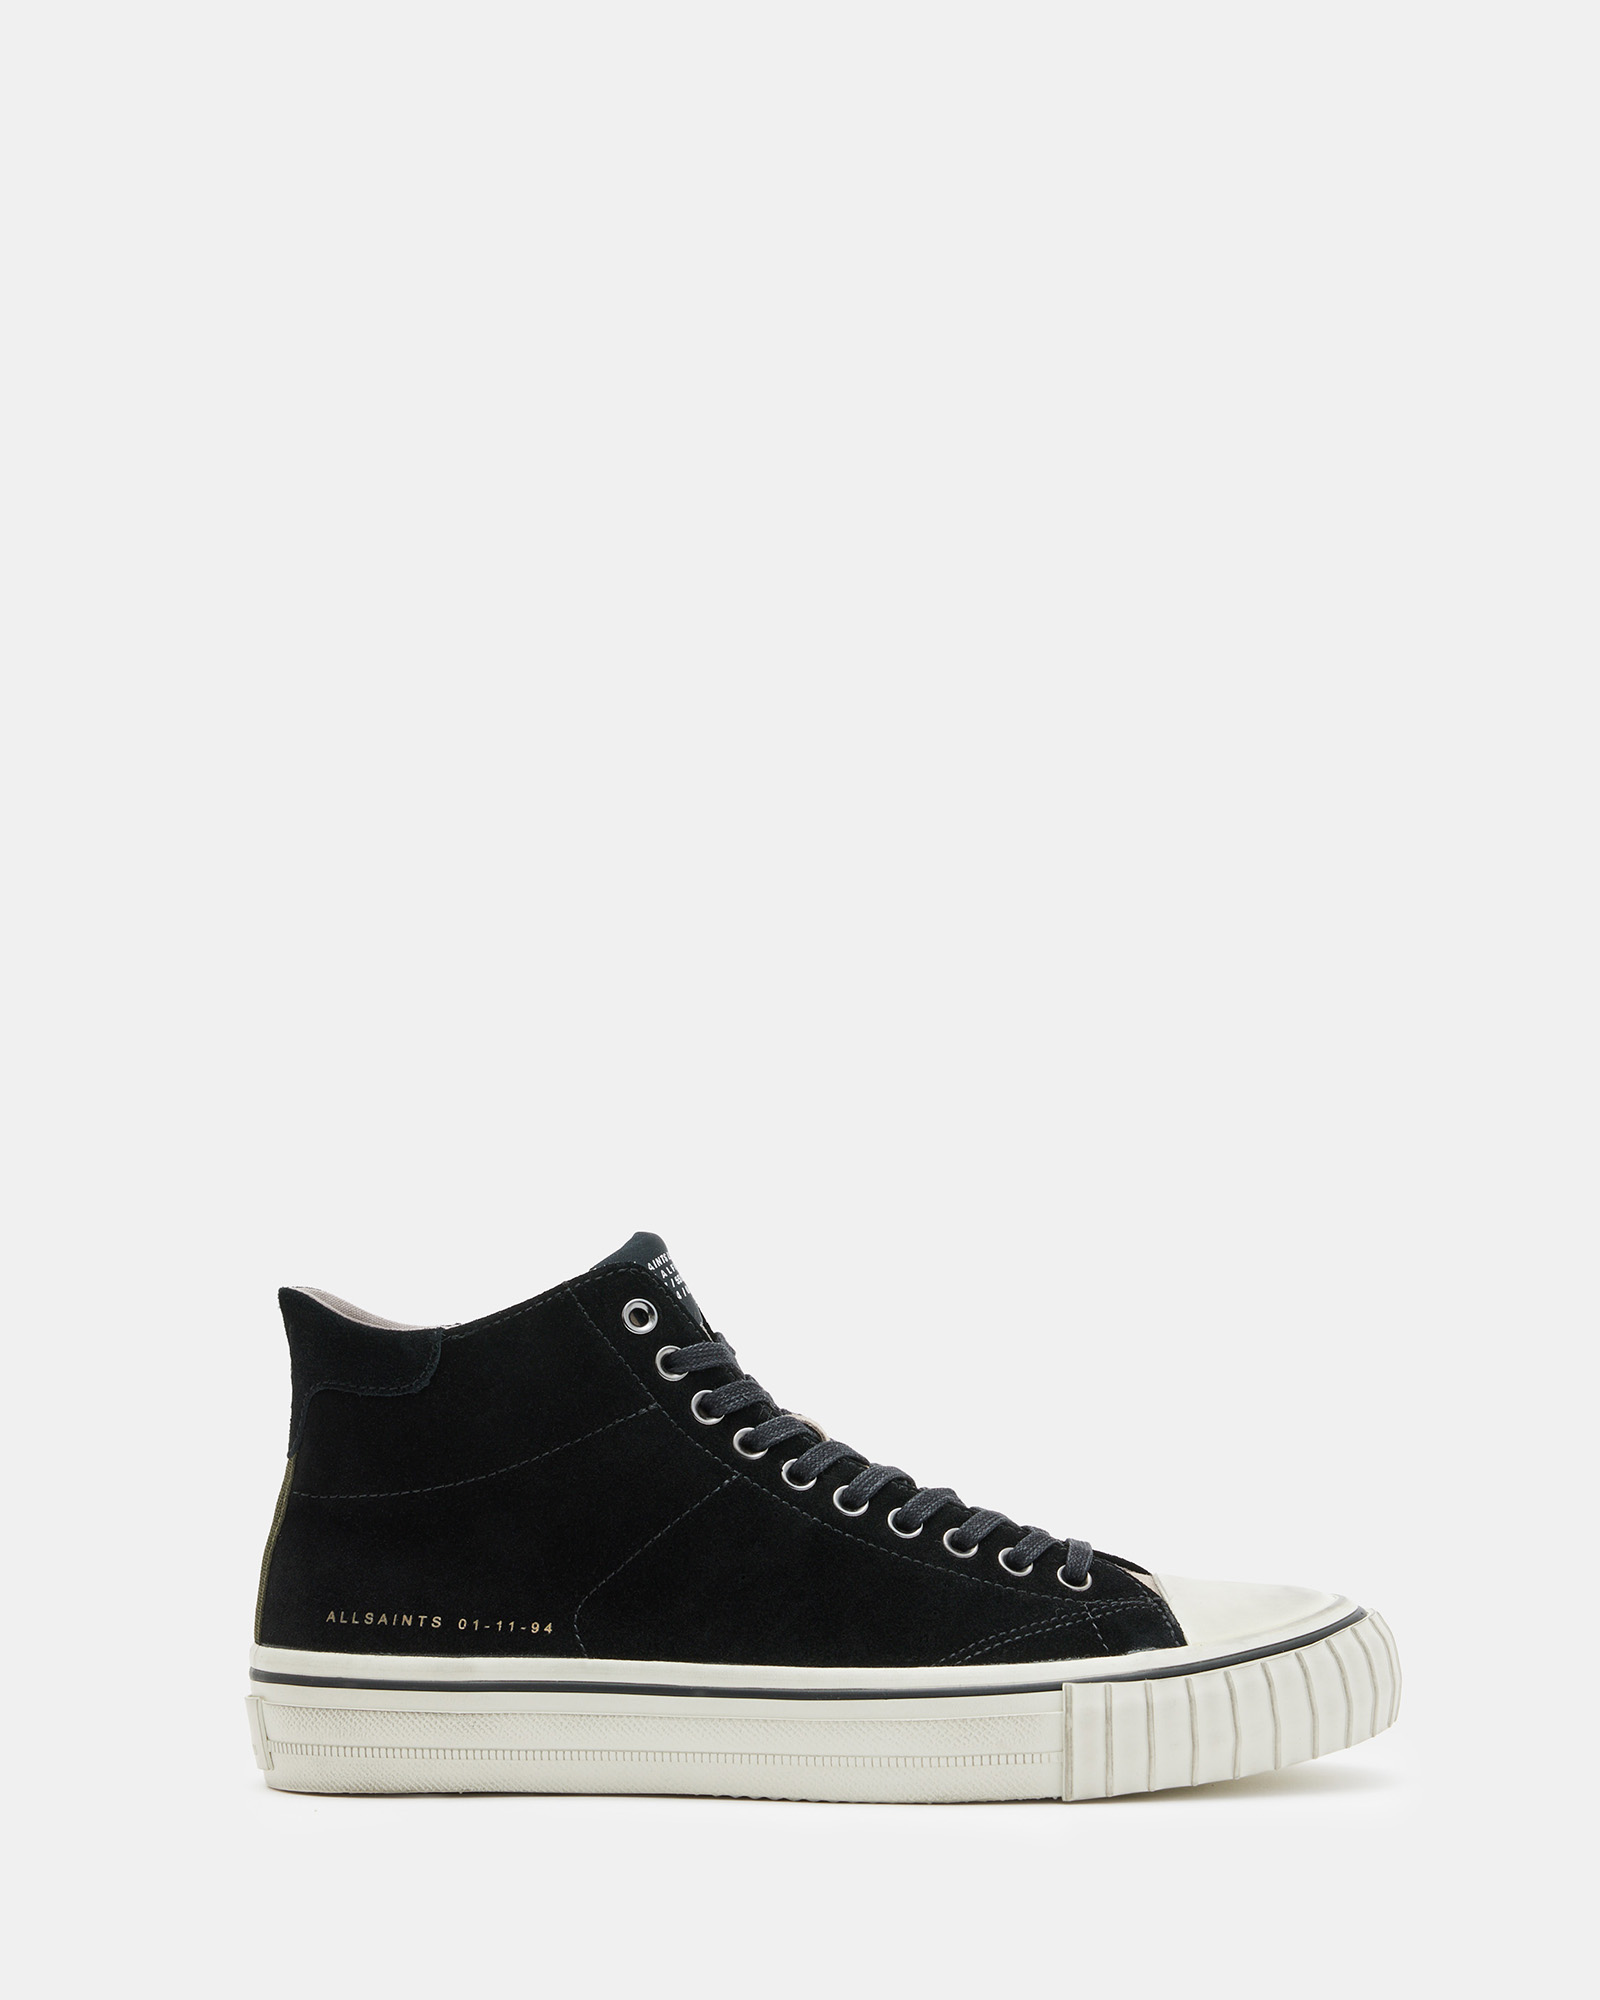 AllSaints Lewis Lace Up Leather High Top Trainers,, Black